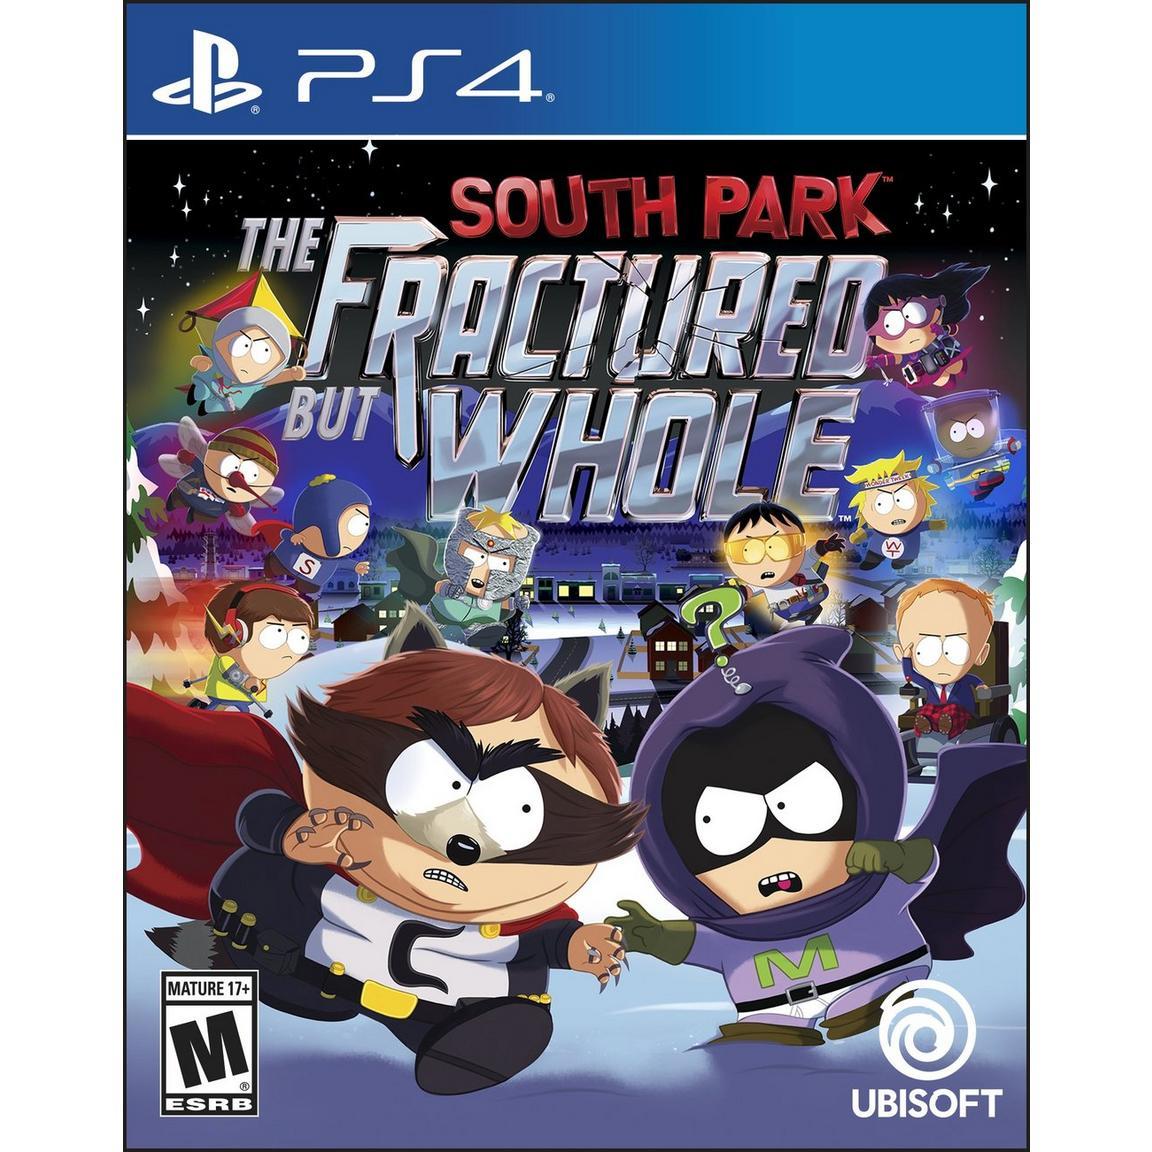 South Park The Fractured But Whole PS4 for $5.99